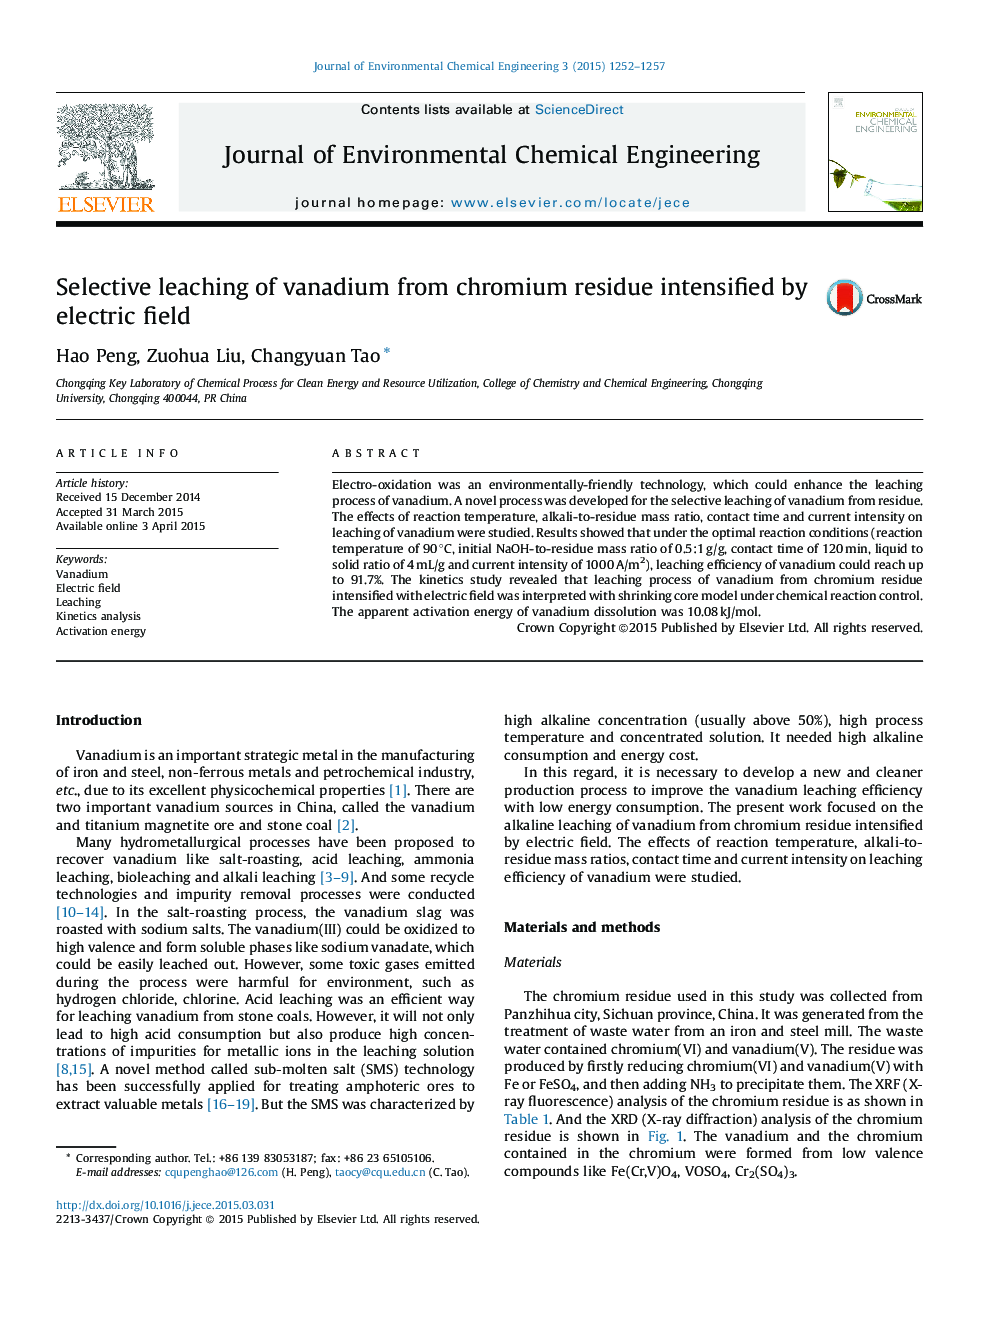 Selective leaching of vanadium from chromium residue intensified by electric field